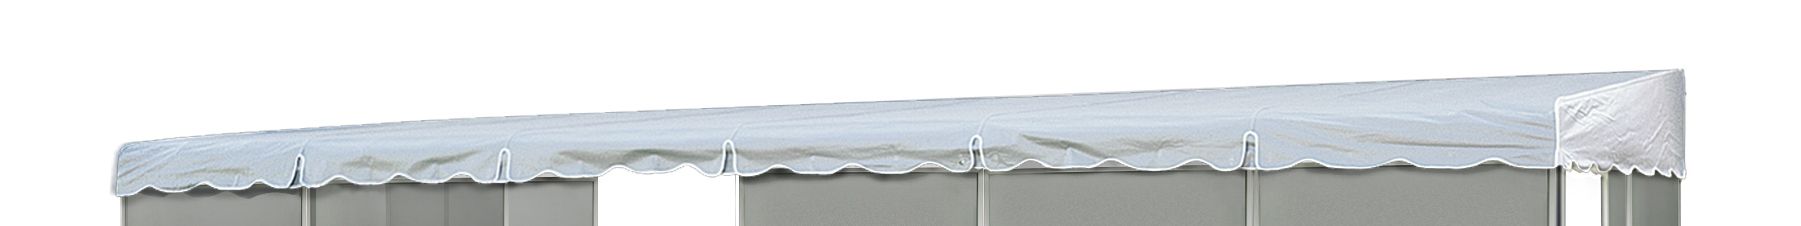 Patio-Mate Replacement Roof for 25'6&quot; x 8'6&quot; Screened Enclosure - Gray